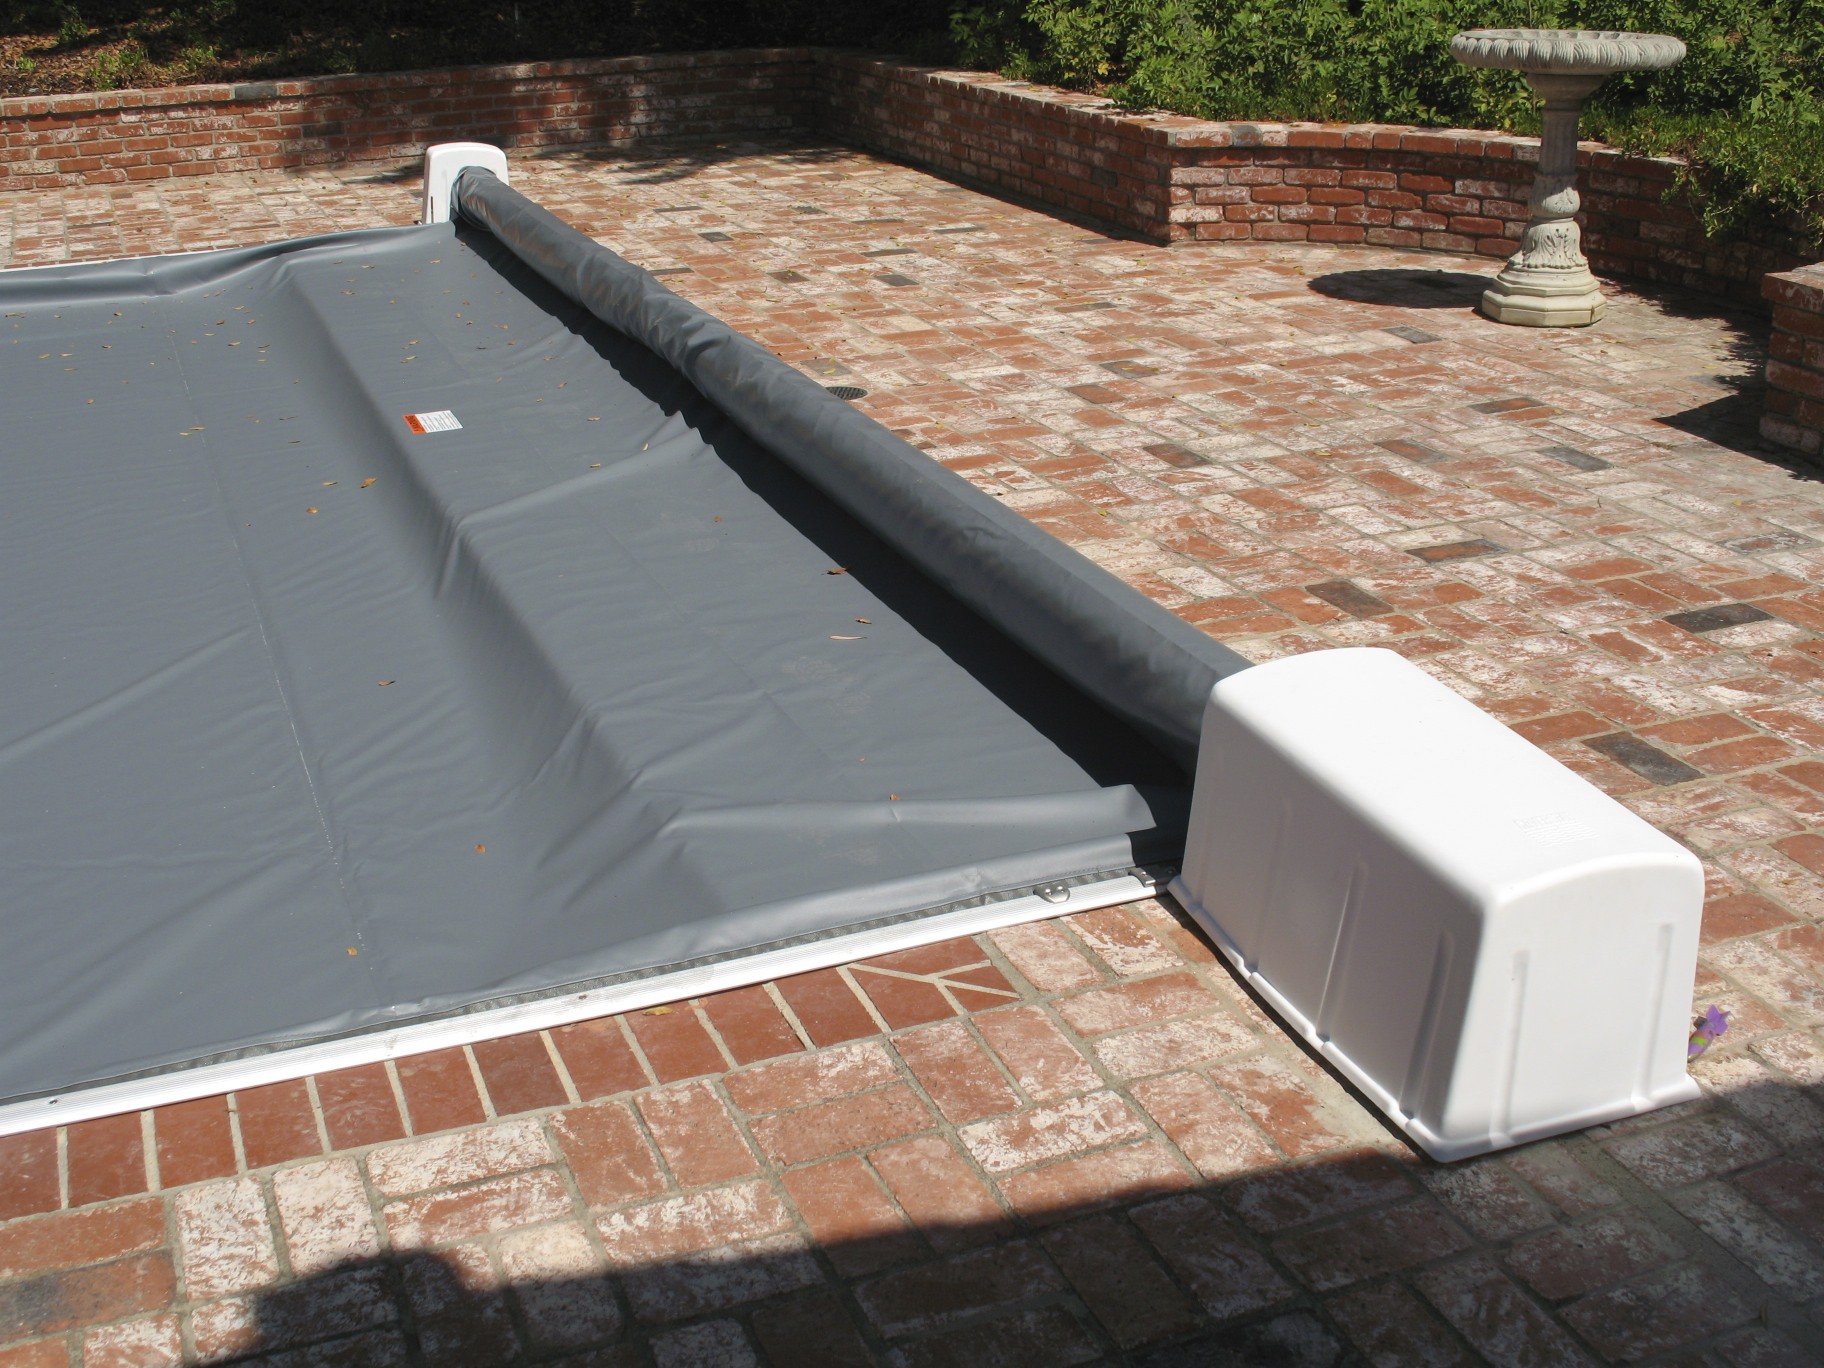 automatic pool cover opens but won